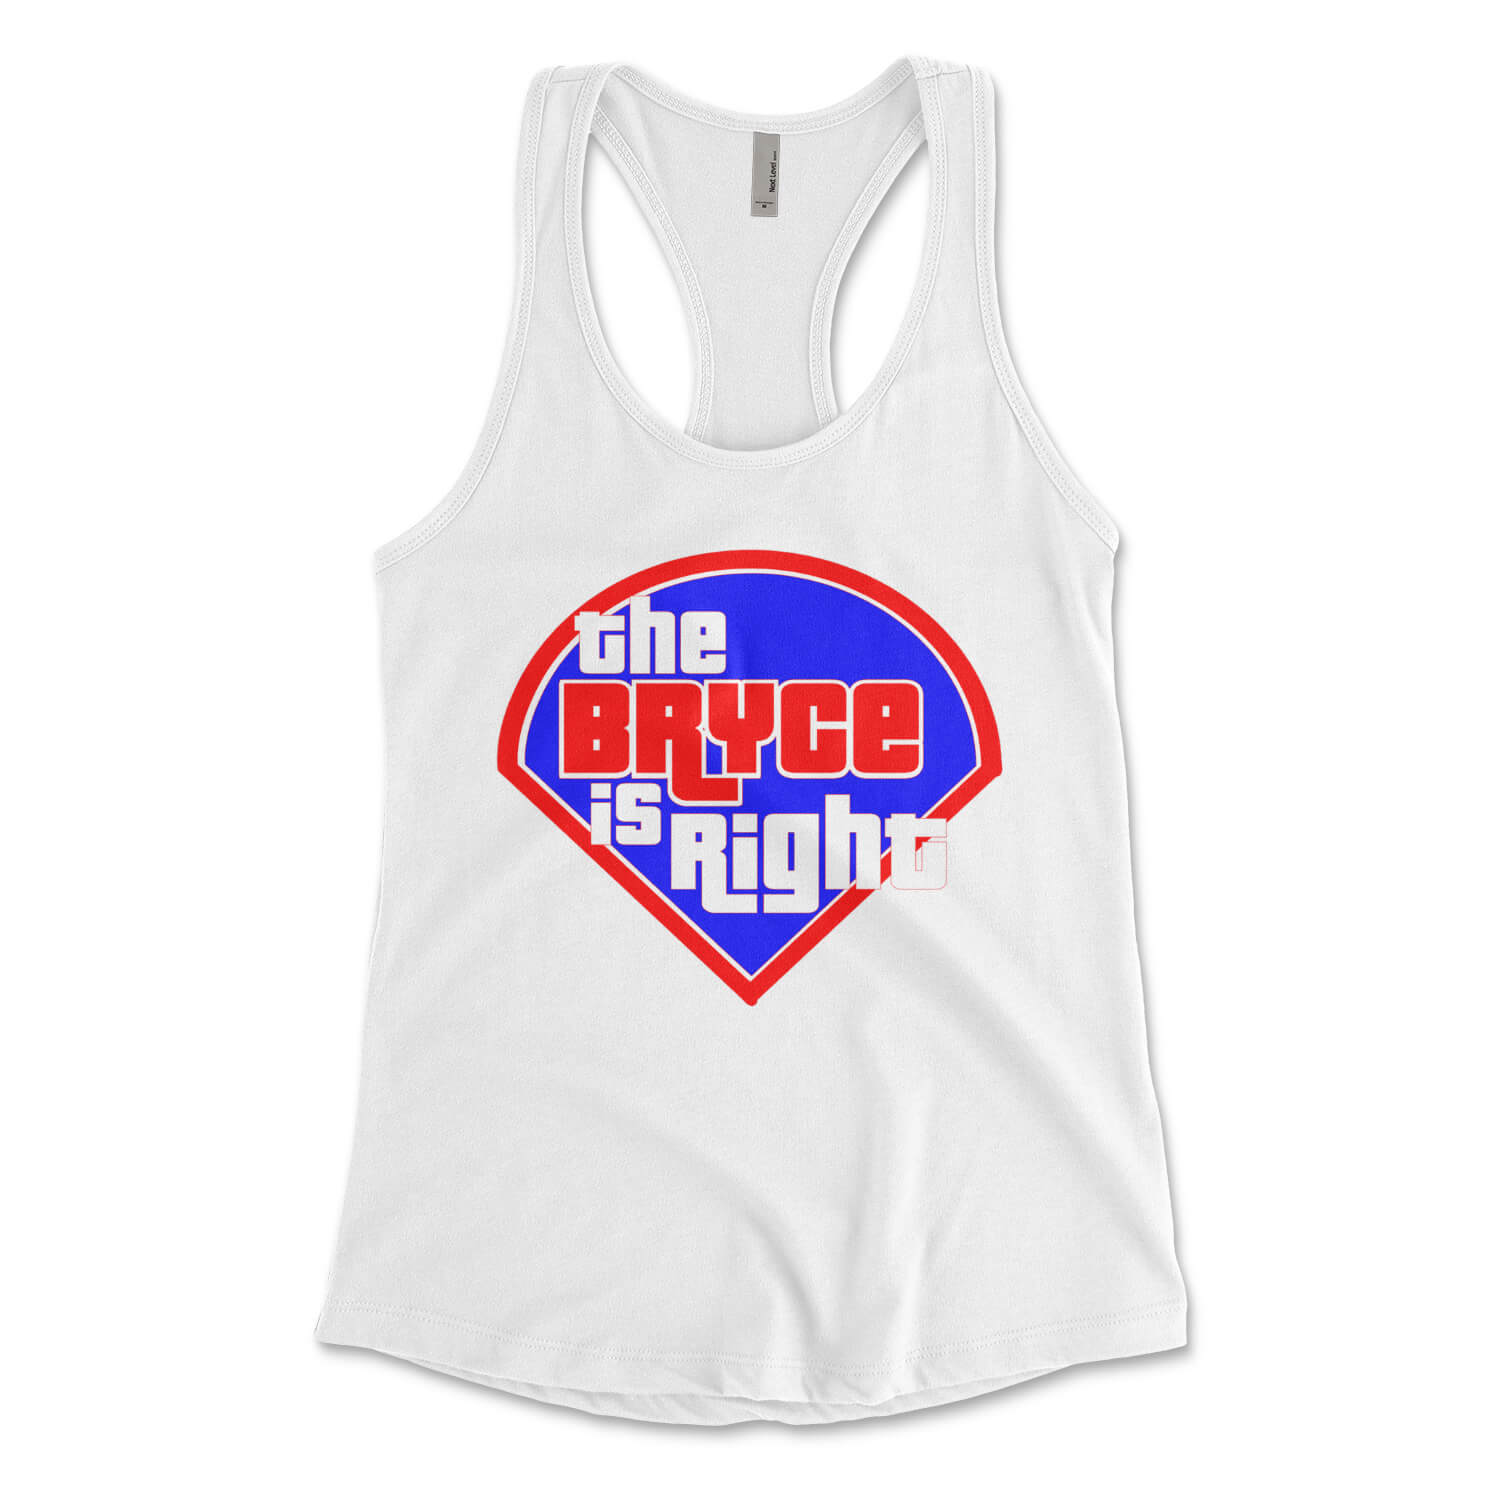 Philadelphia Phillies Bryce Harper the Bryce Is Right womens white racerback tank top from Phillygoat